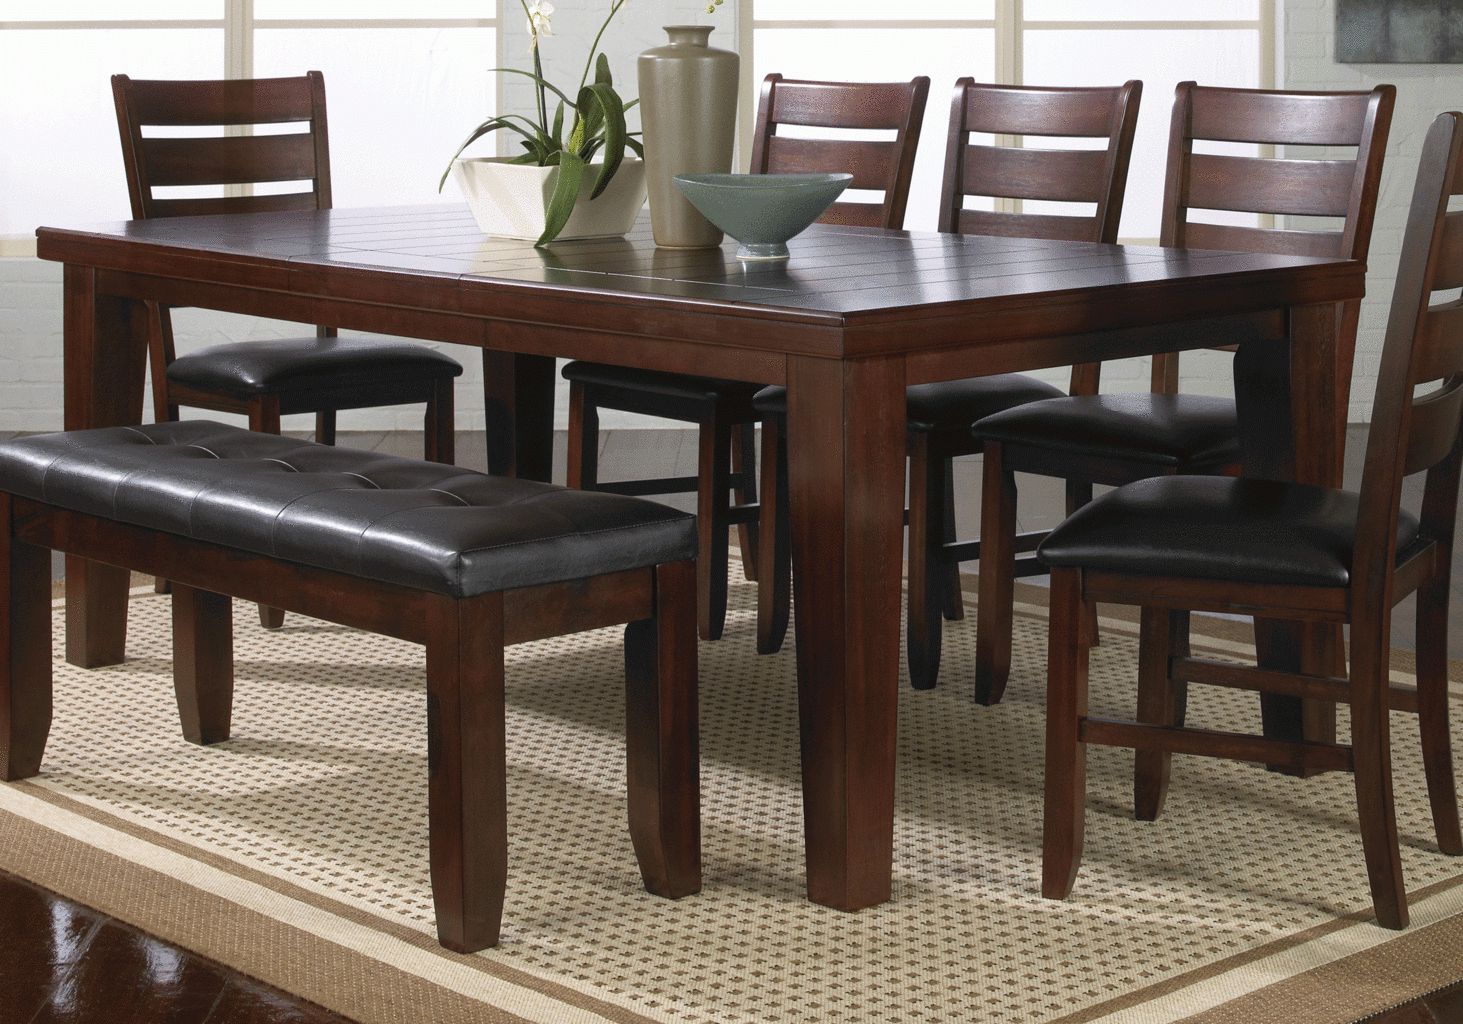 Casual Dining Sets Archives | Cincinnati Overstock Warehouse Throughout Most Recently Released Cincinnati 3 Piece Dining Sets (View 4 of 20)